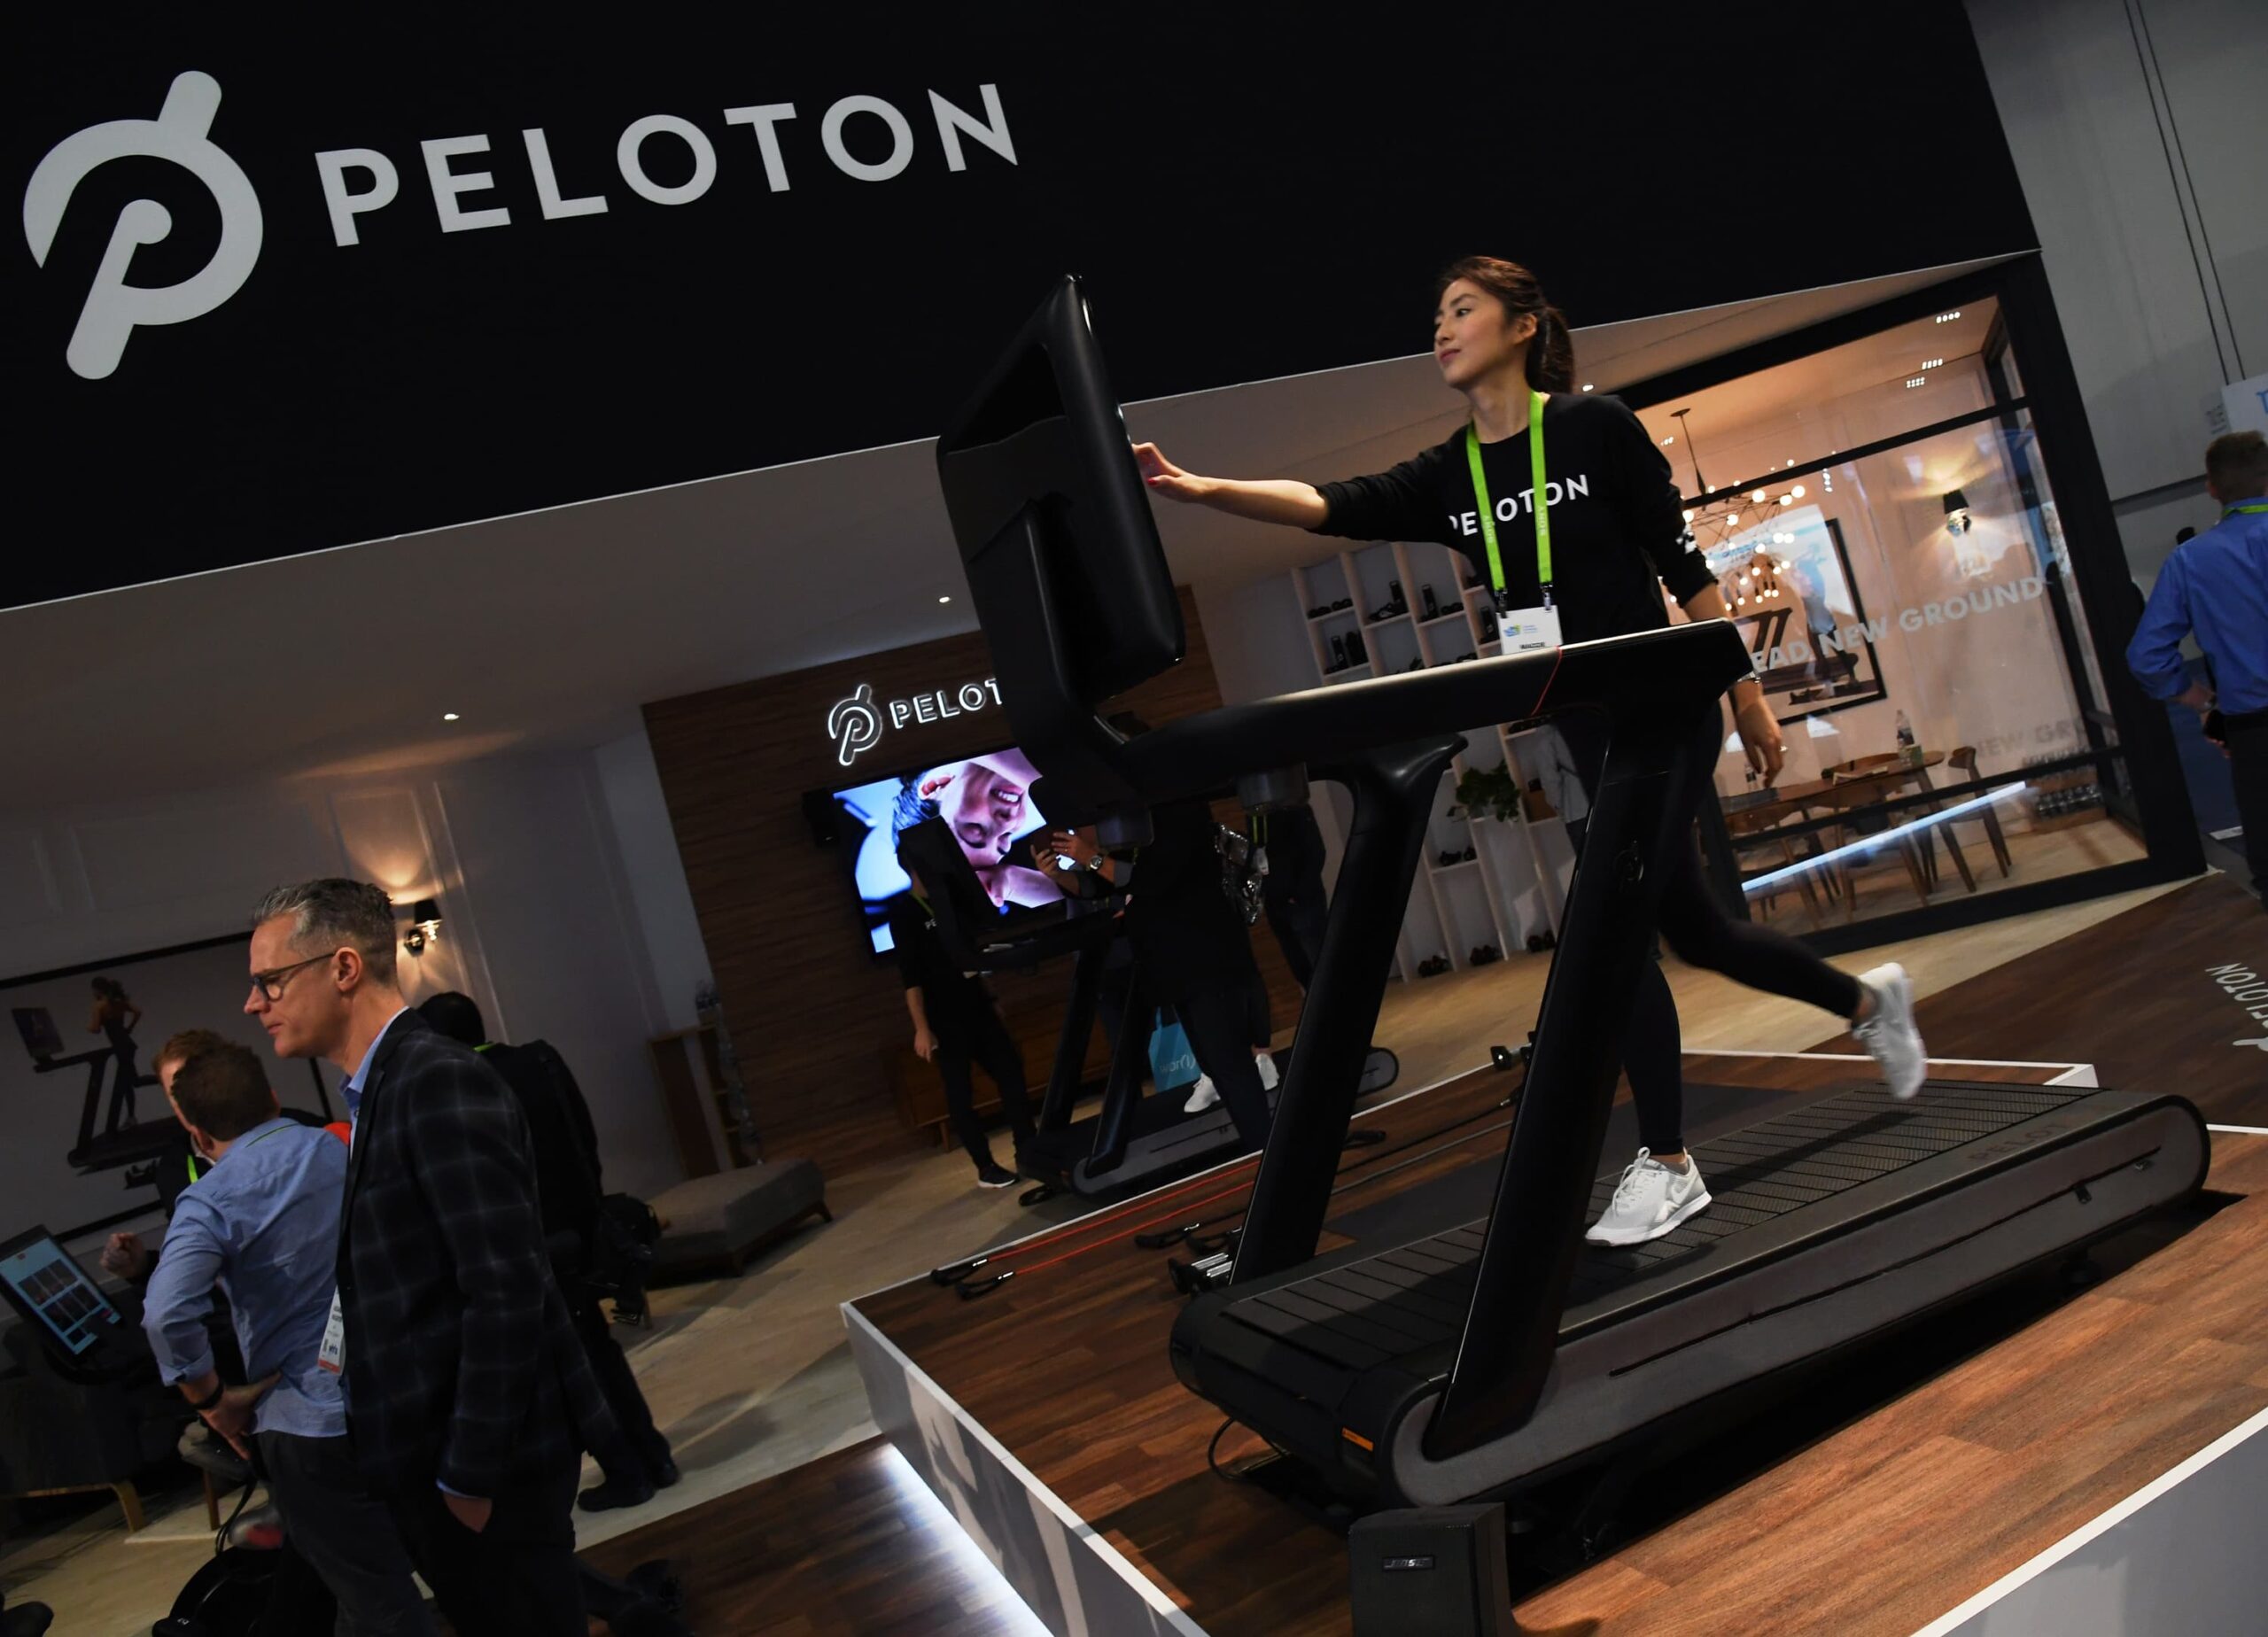 Peloton’s conflict with company over Tread+ security might tarnish model